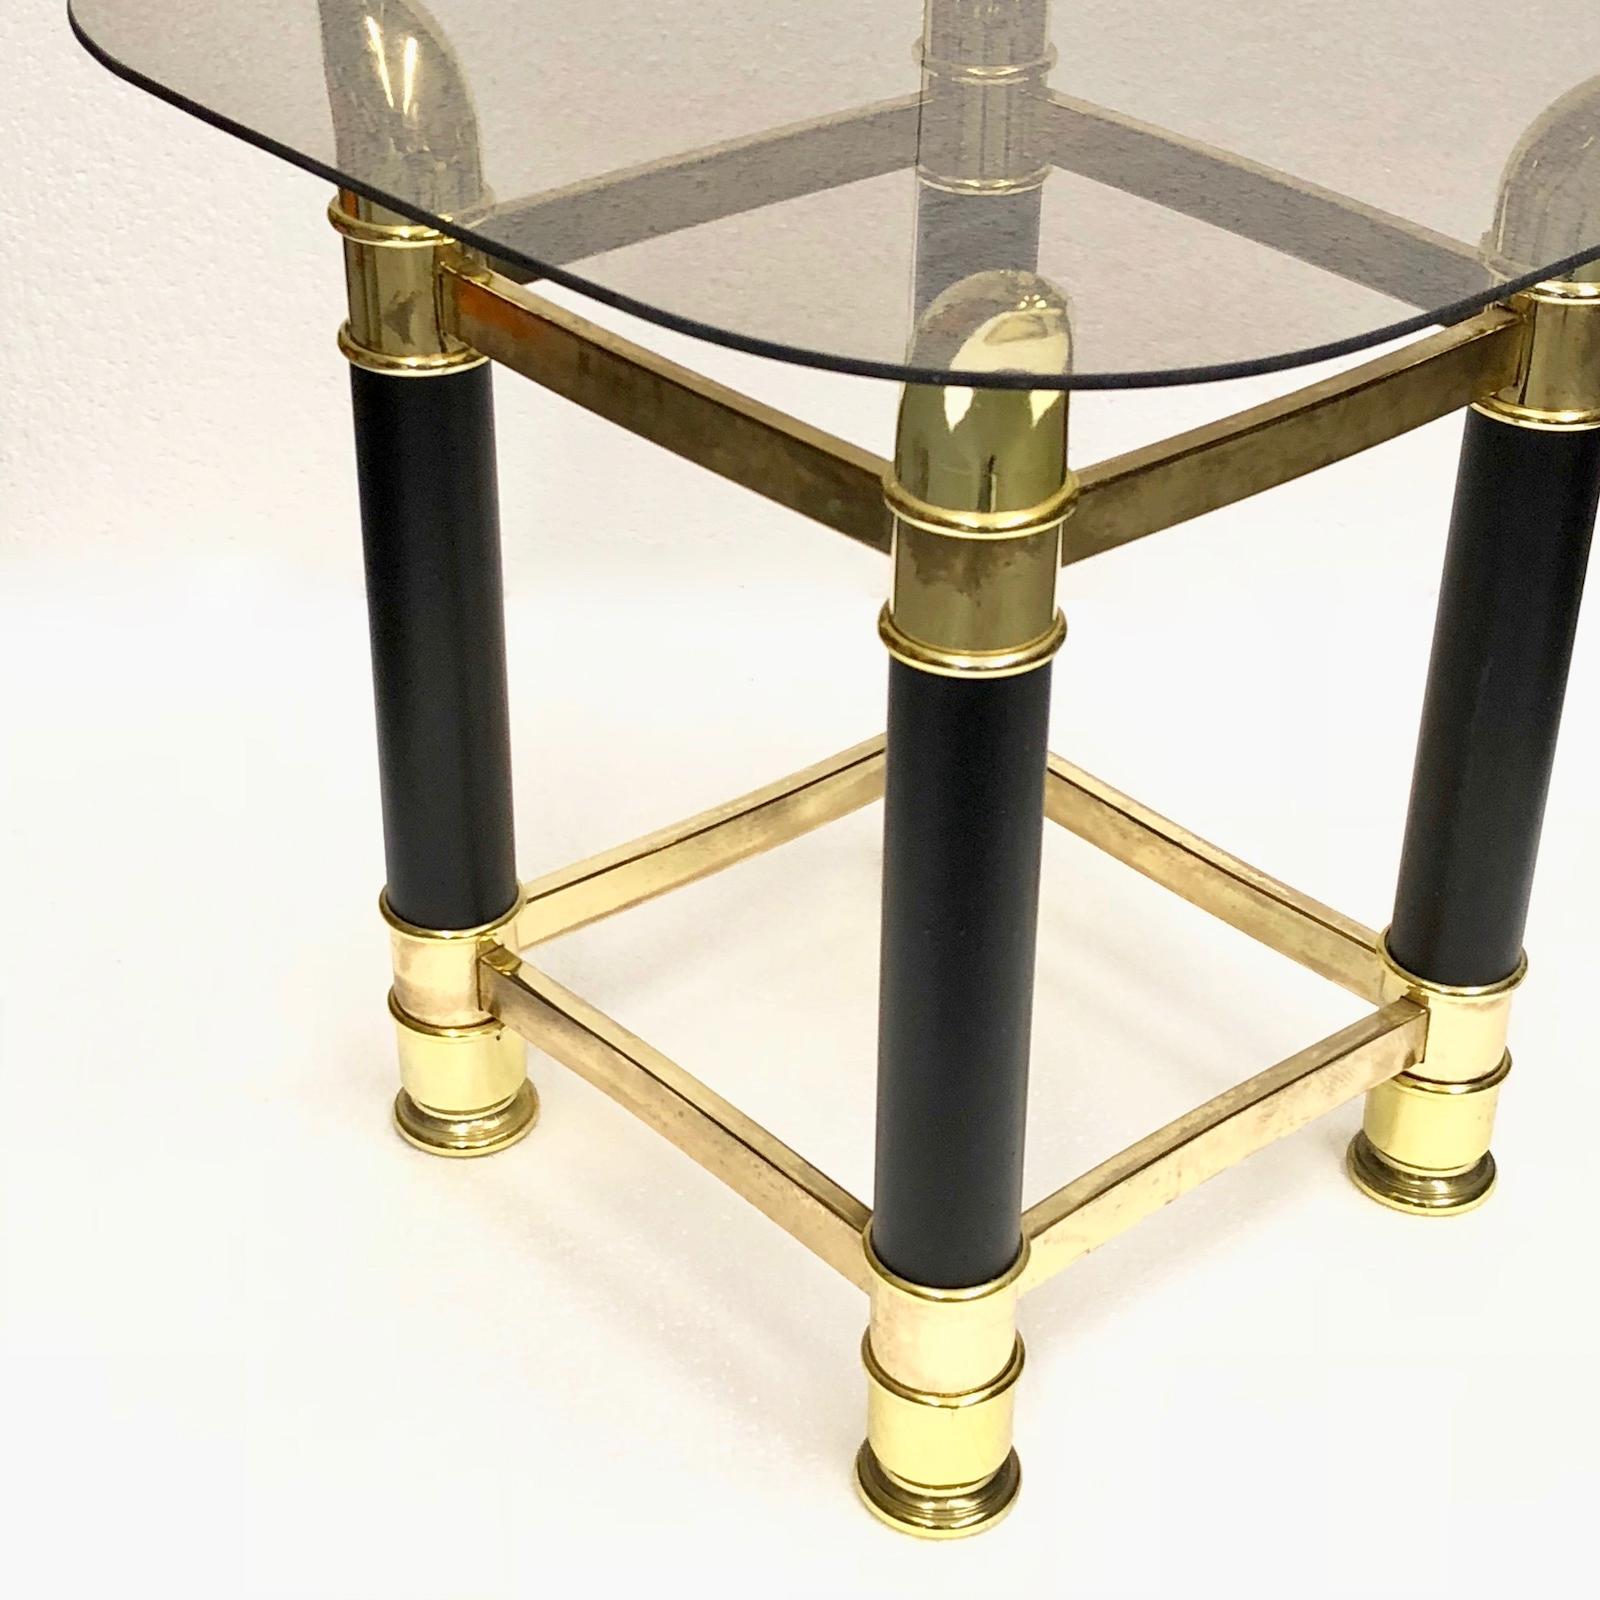 Modern Italian Midcentury Brass and Glass Side Table, 1970s For Sale